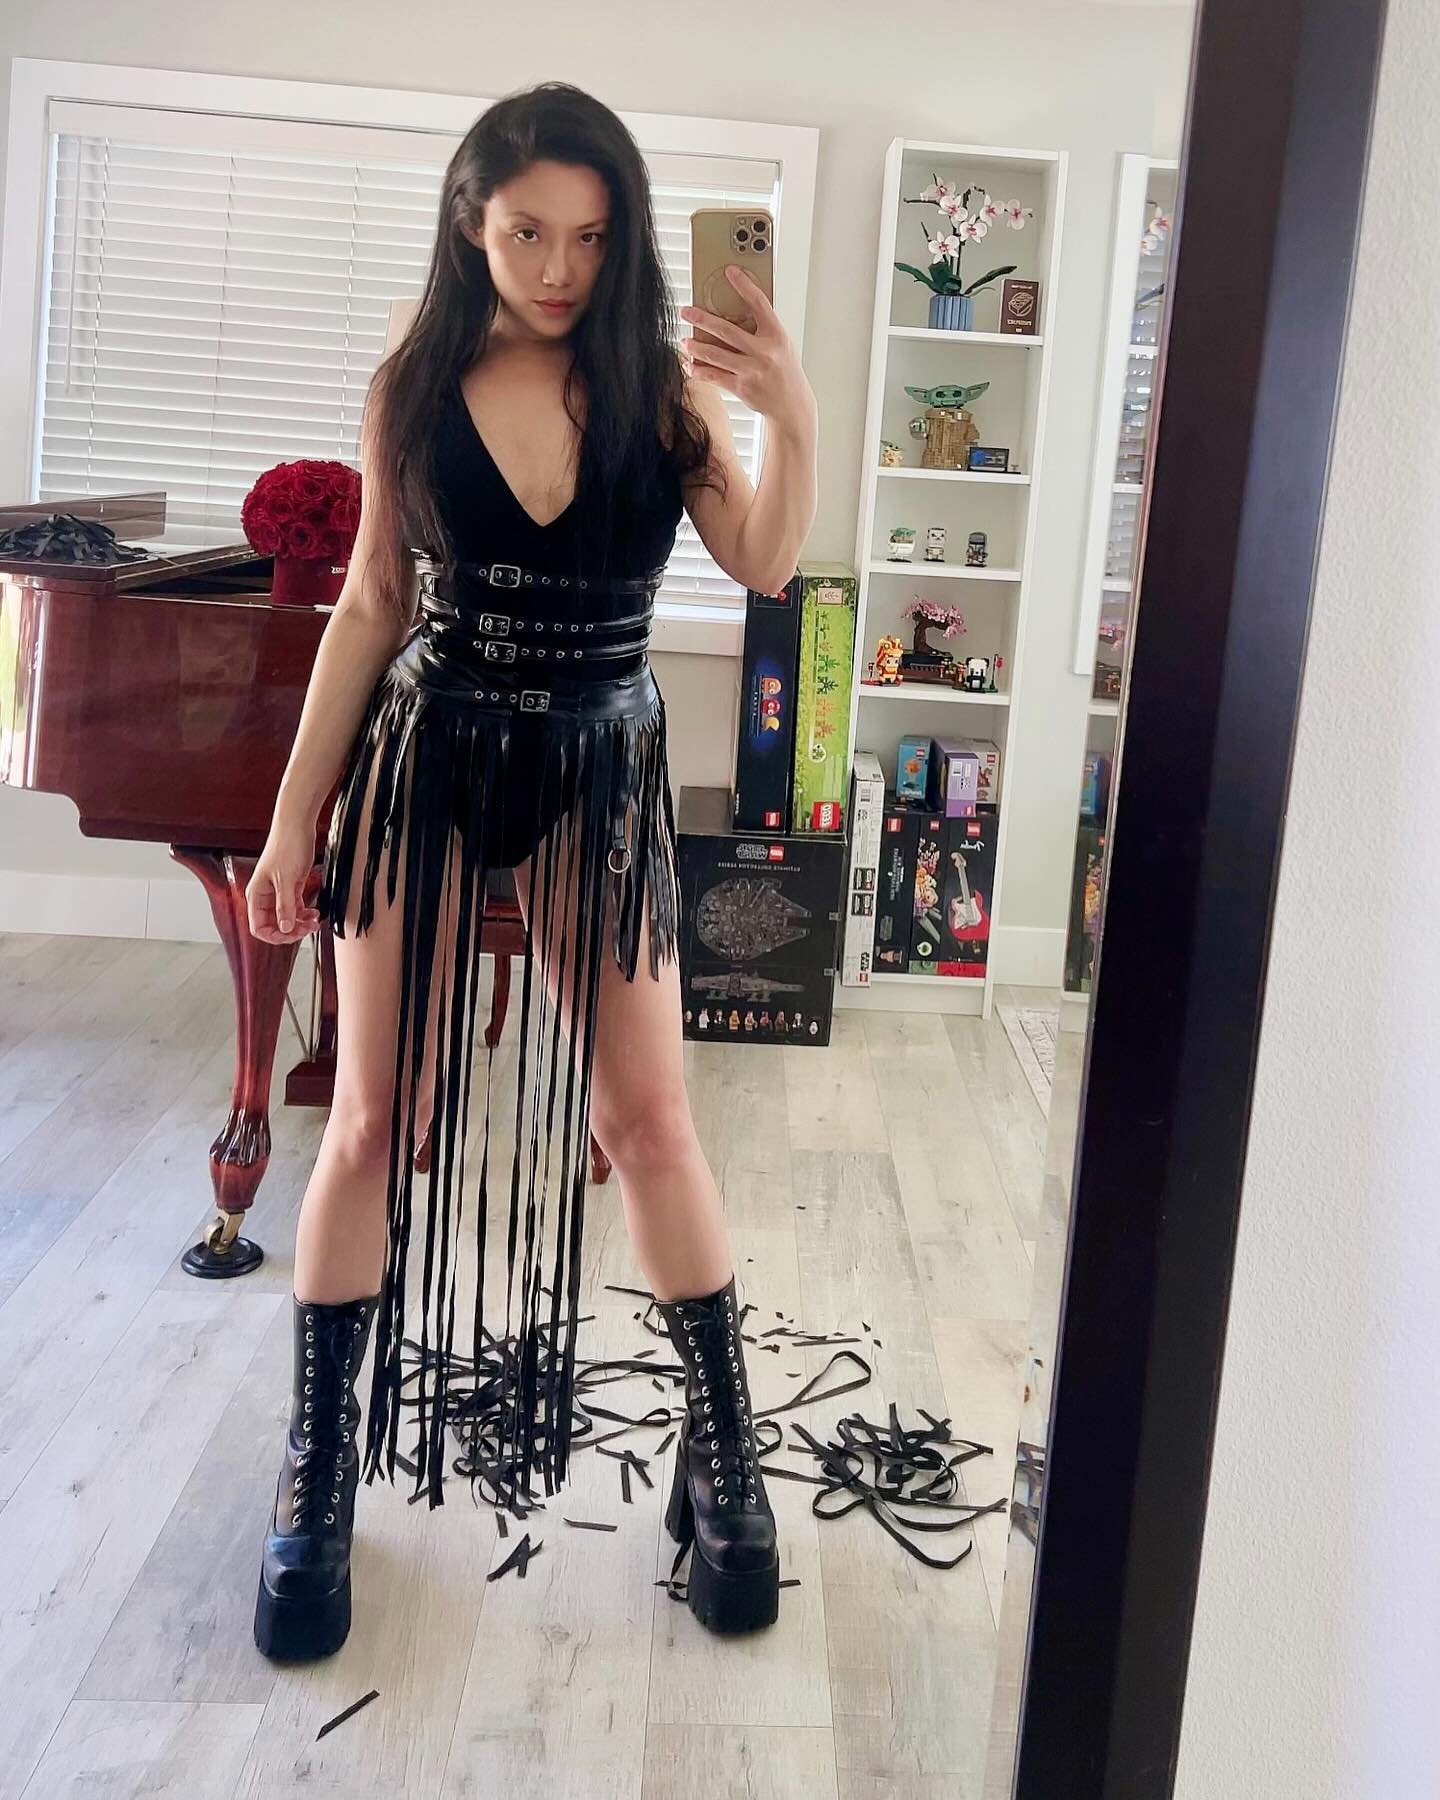 Putting together new stage outfits for @hanszimmerlive 2024 Tour 🖤 I&rsquo;ve been wearing the same gladiator skirt situation onstage for 4 years and it&rsquo;s time to switch things up!